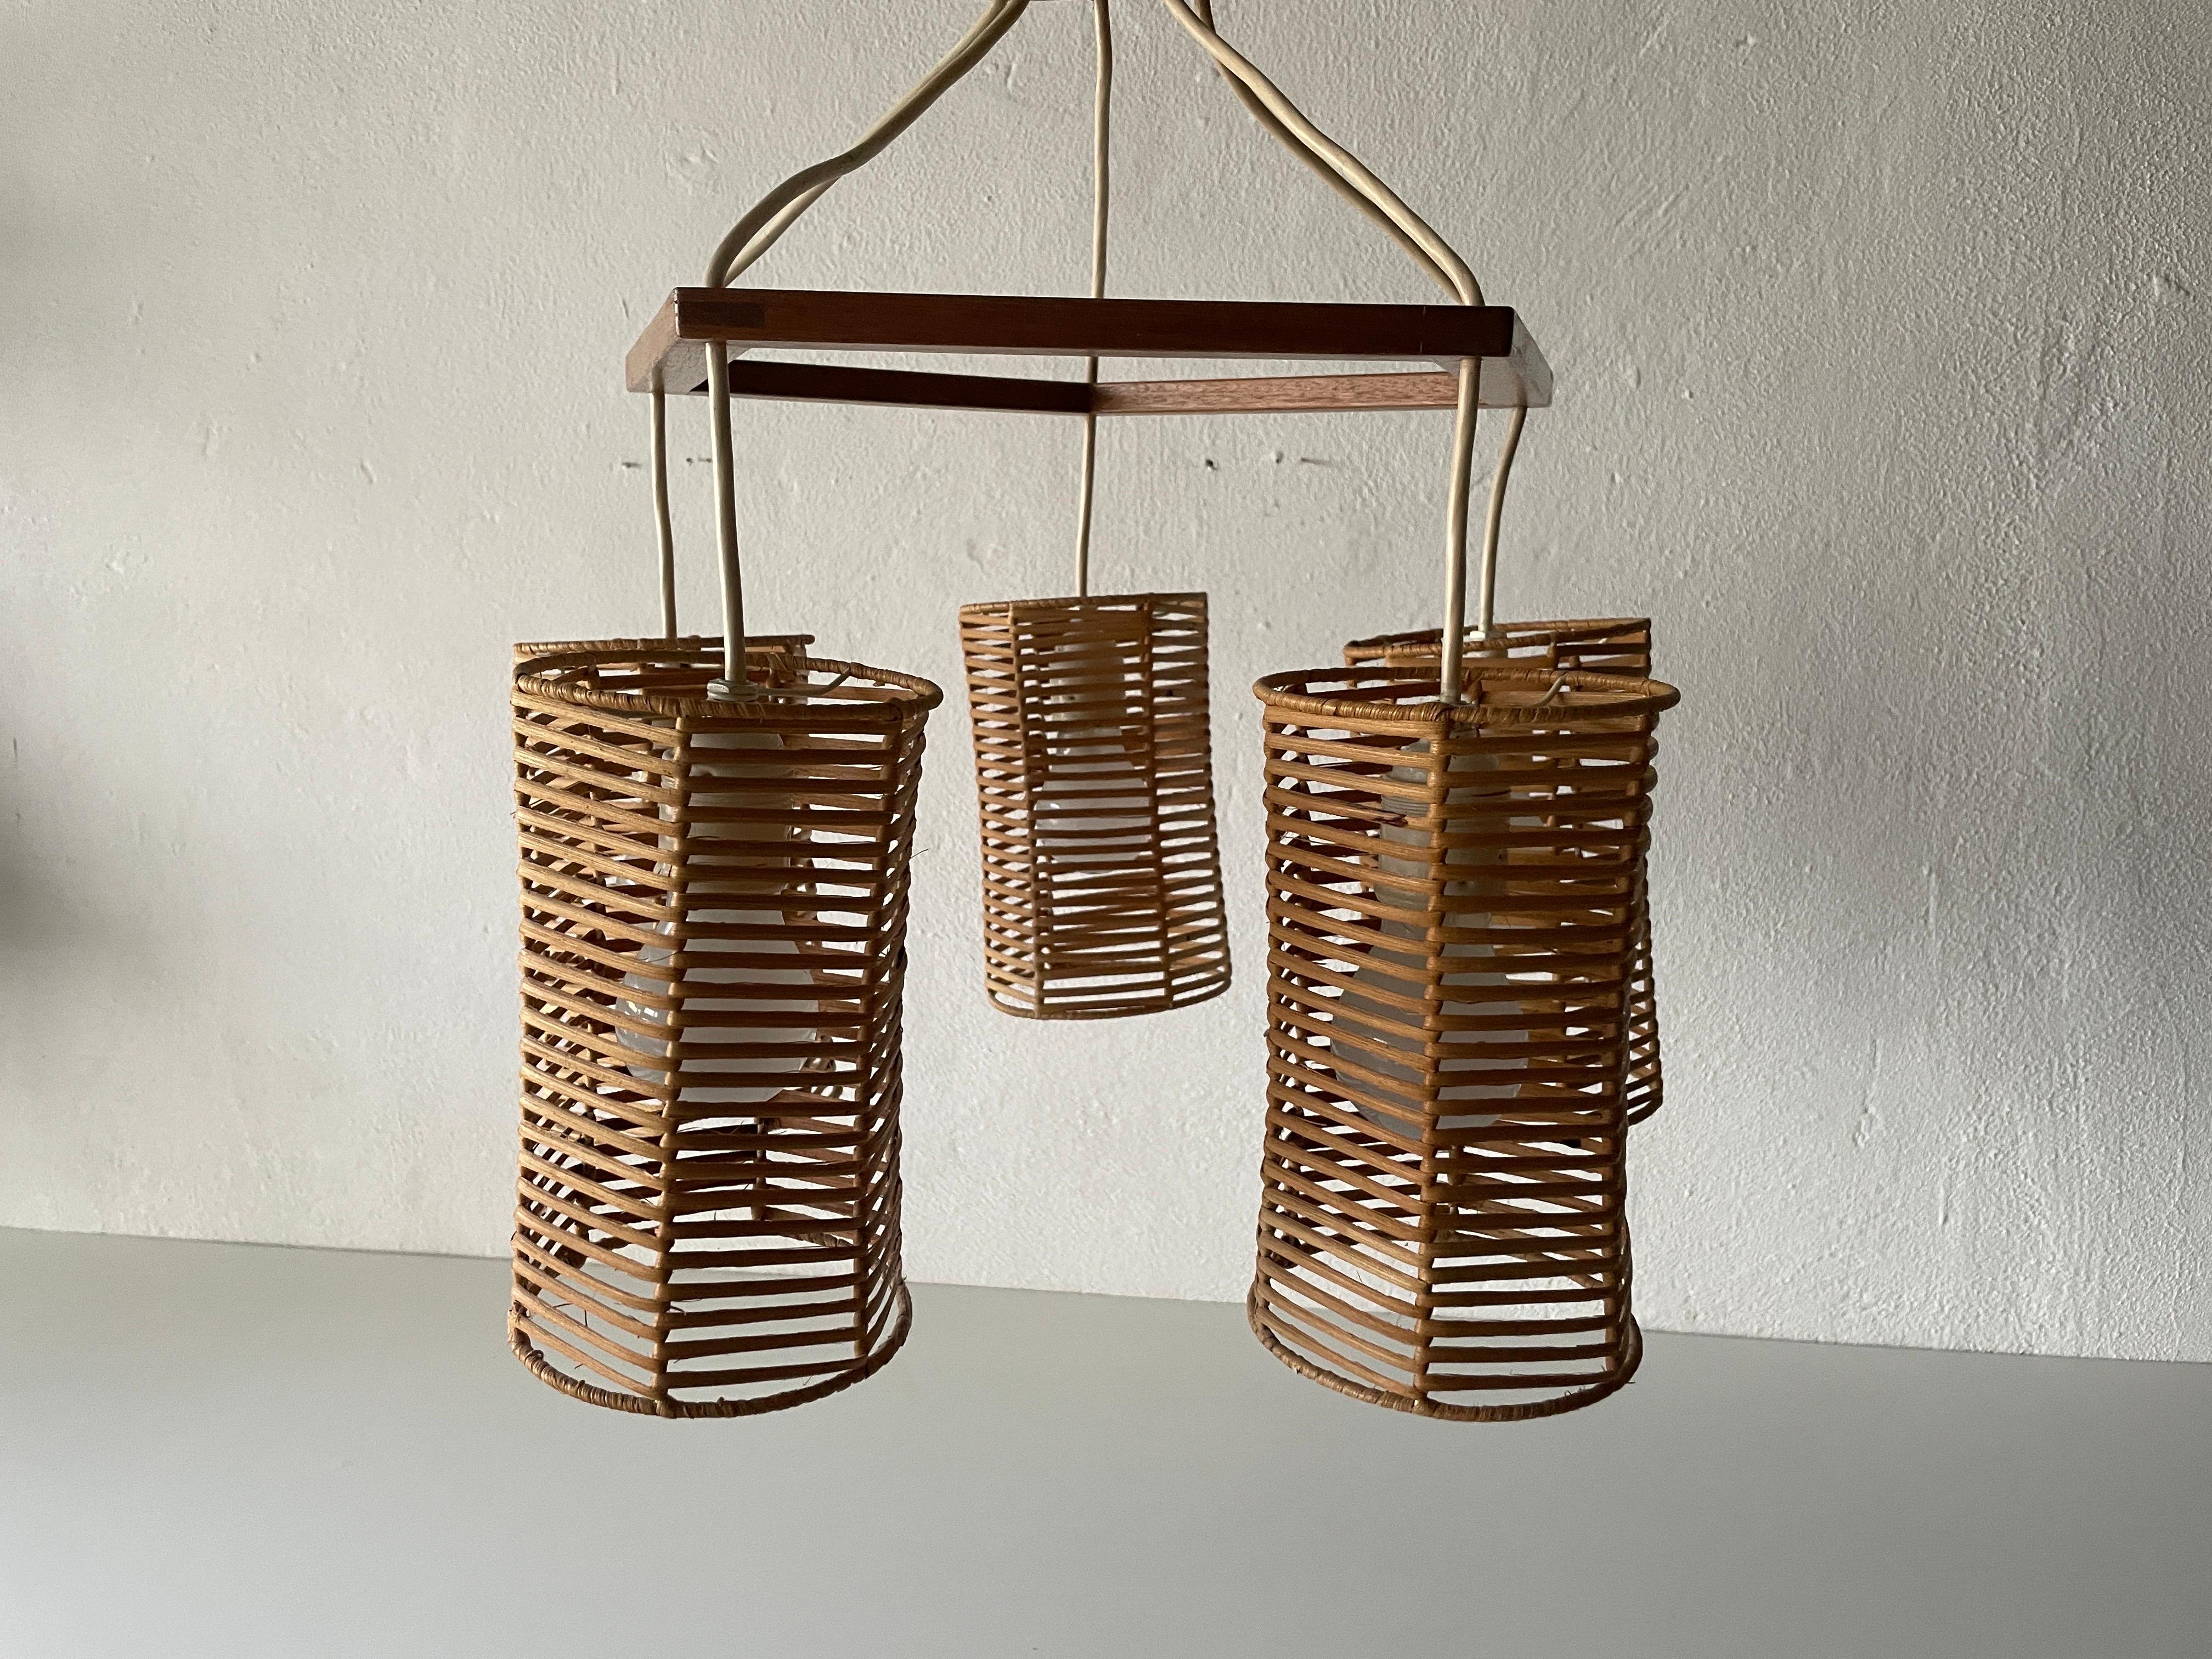 5-head Wicker and Wood Pendant Lamp, 1960s, Germany

Lampshade is in very good vintage condition.
No crack, no missed piece.
Original canopy.

This lamp works with 5x E27 light bulb. Max 100W
Wired and suitable to use with 220V and 110V for all